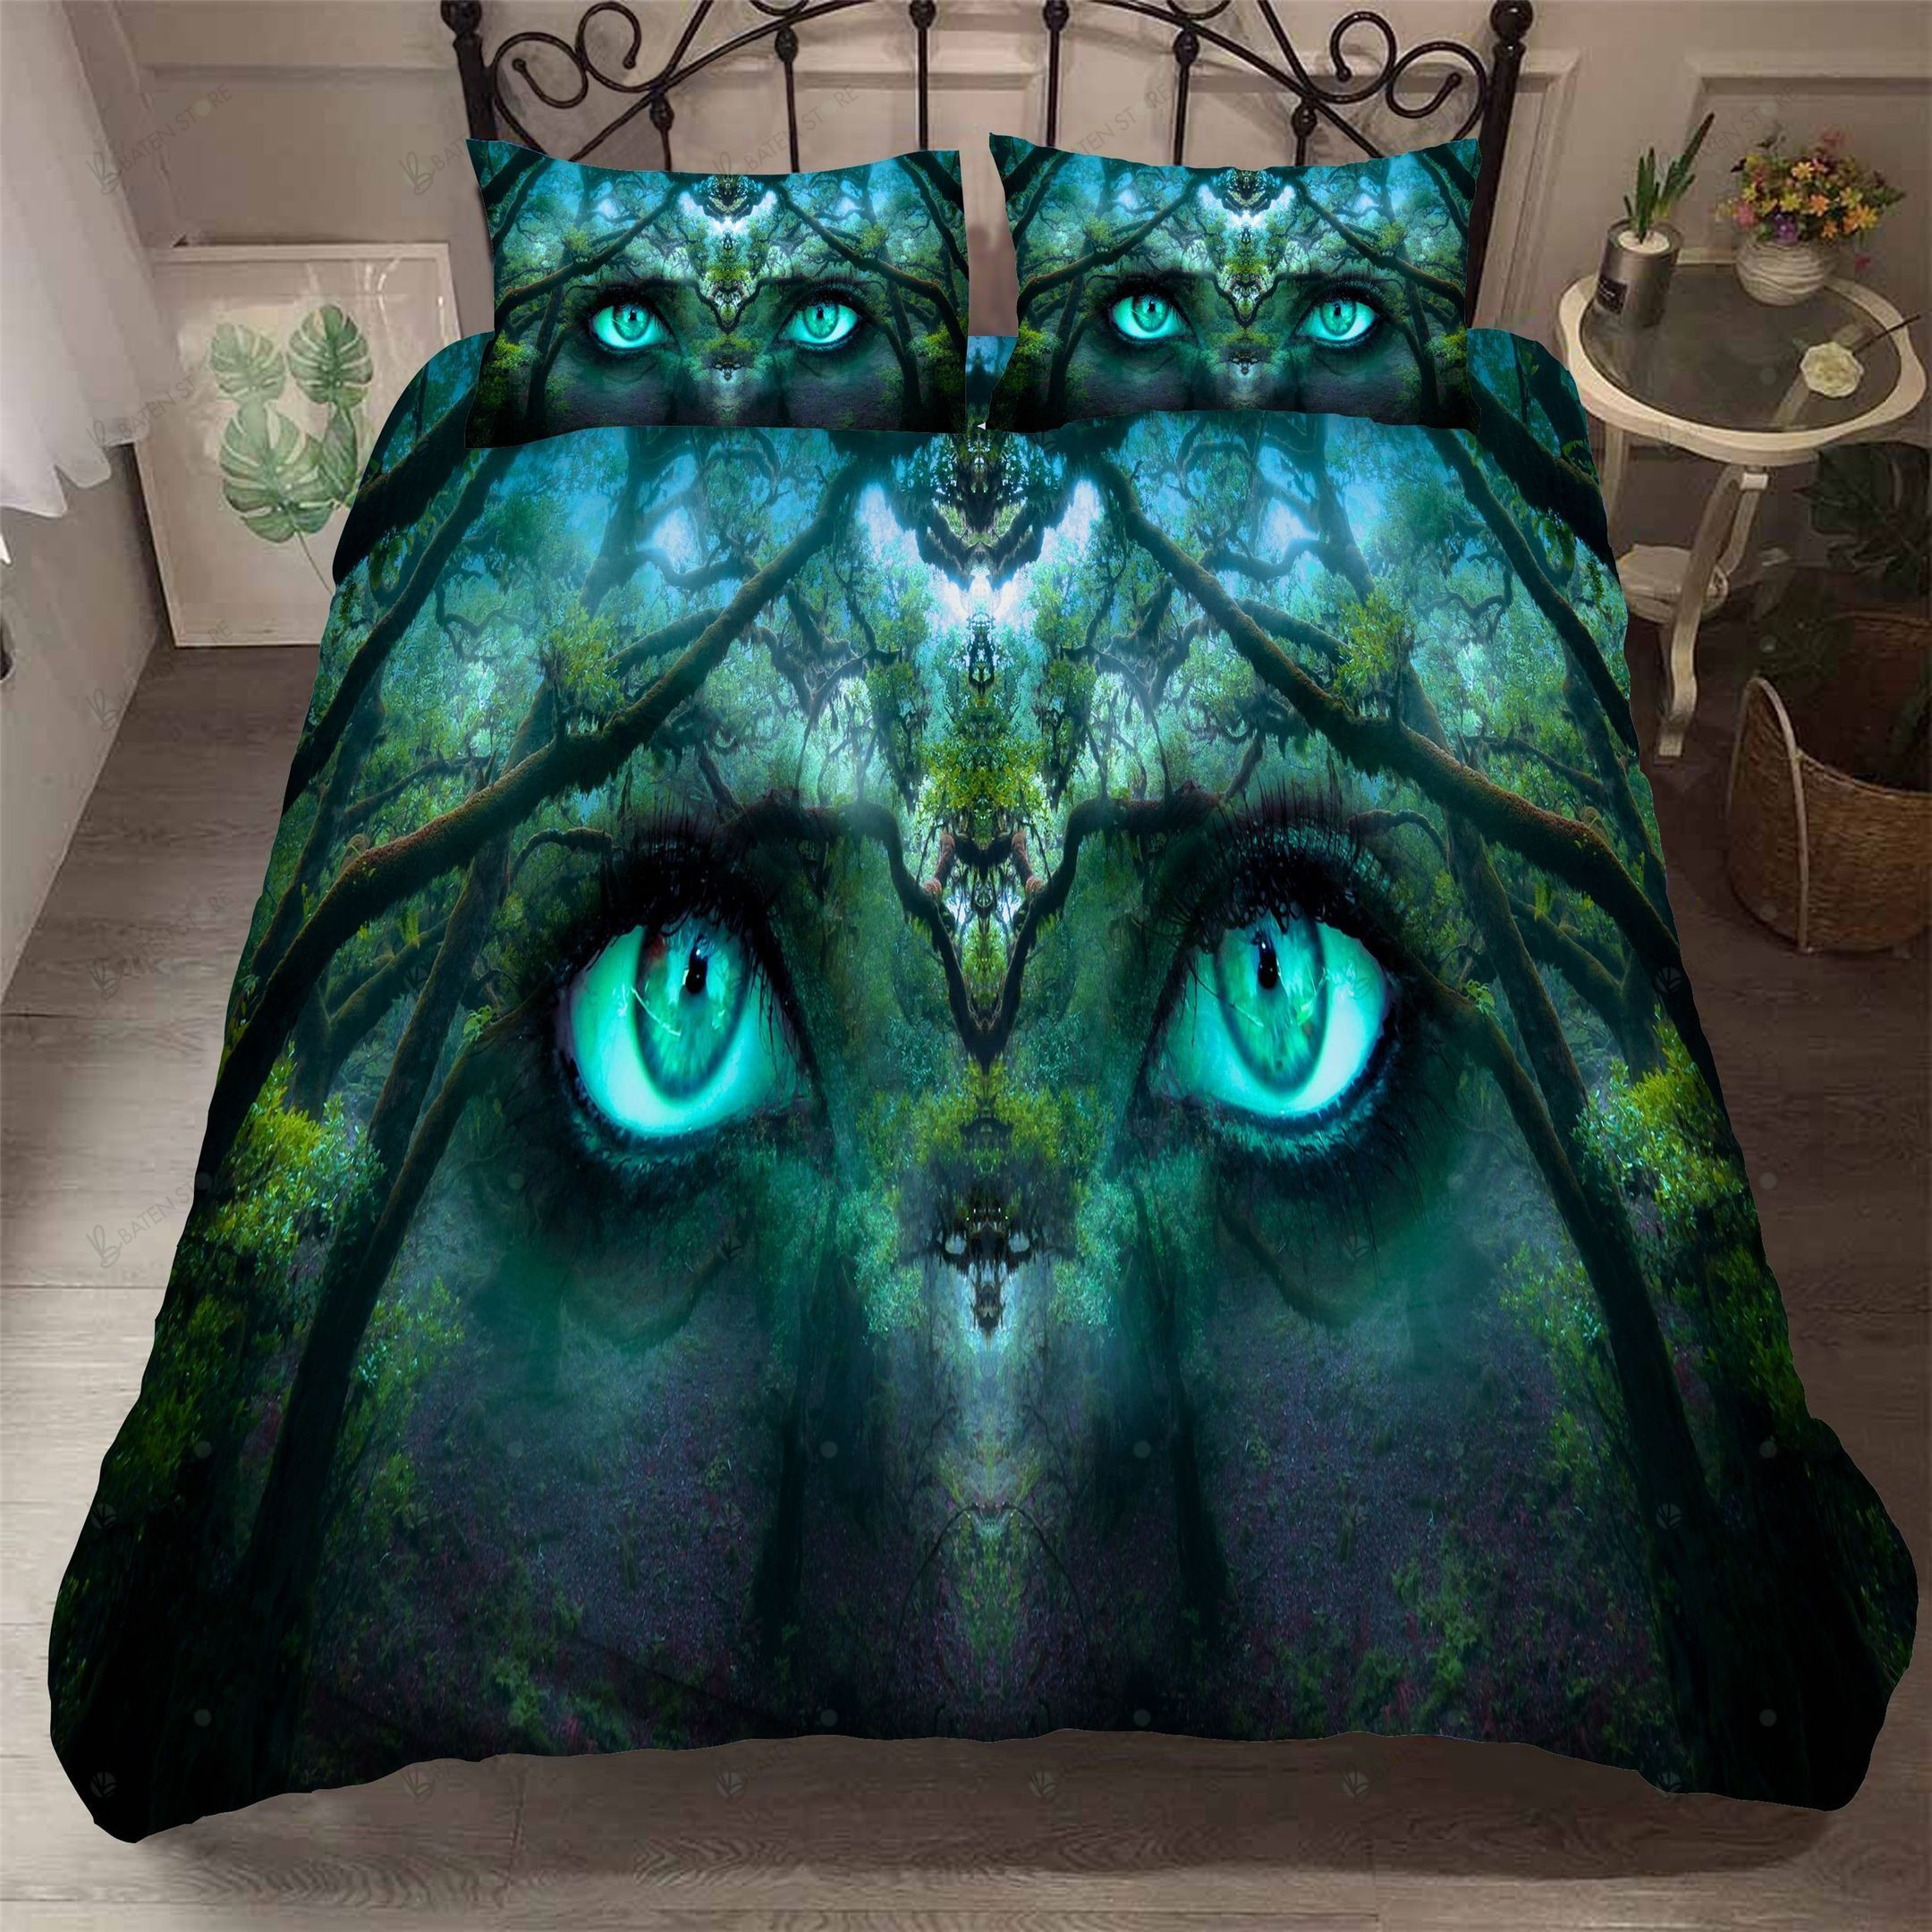 3d blue elf cat bedding set with sheets and duvet cover perfect presents for birthdays christmas and thanksgiving oezji